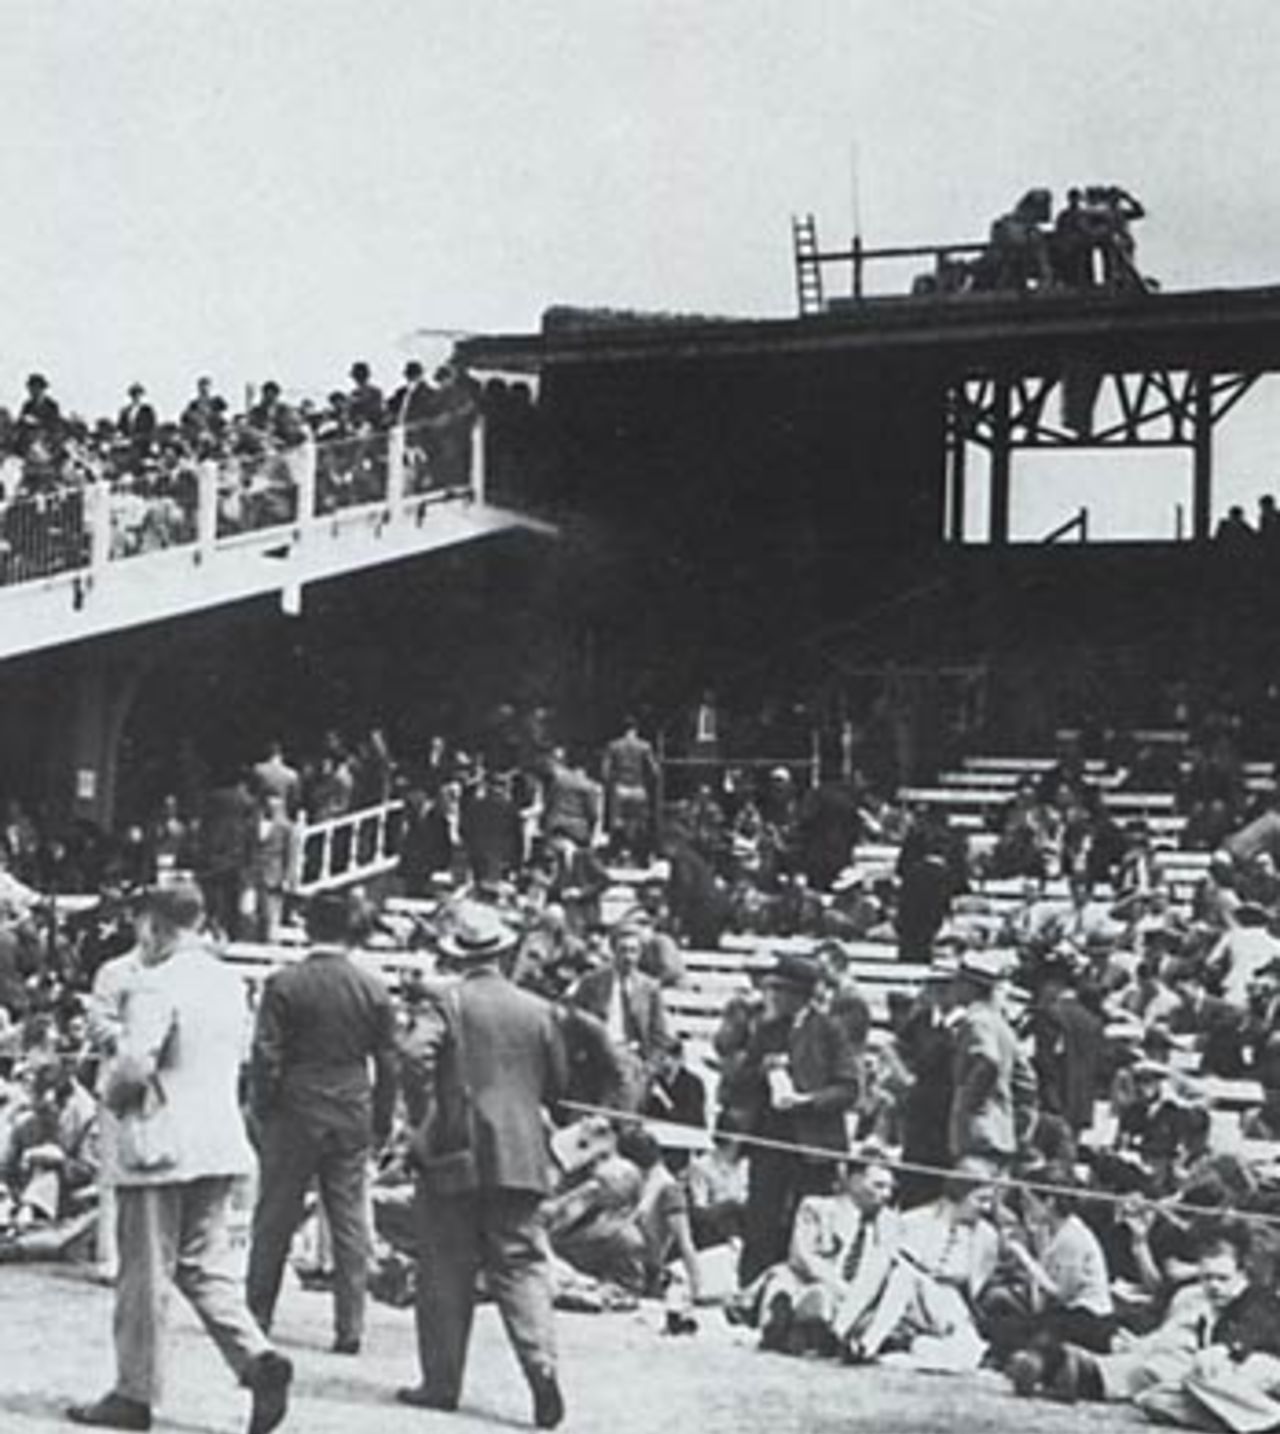 TV cameras at Lord's in 1938 on top of the stand between the Free Seats (now the Edrich Stand) and the Mound.  Teddy Wakelam, the commentator, was also situated here, England v Australia, Lord's, 2nd Test, June 1938